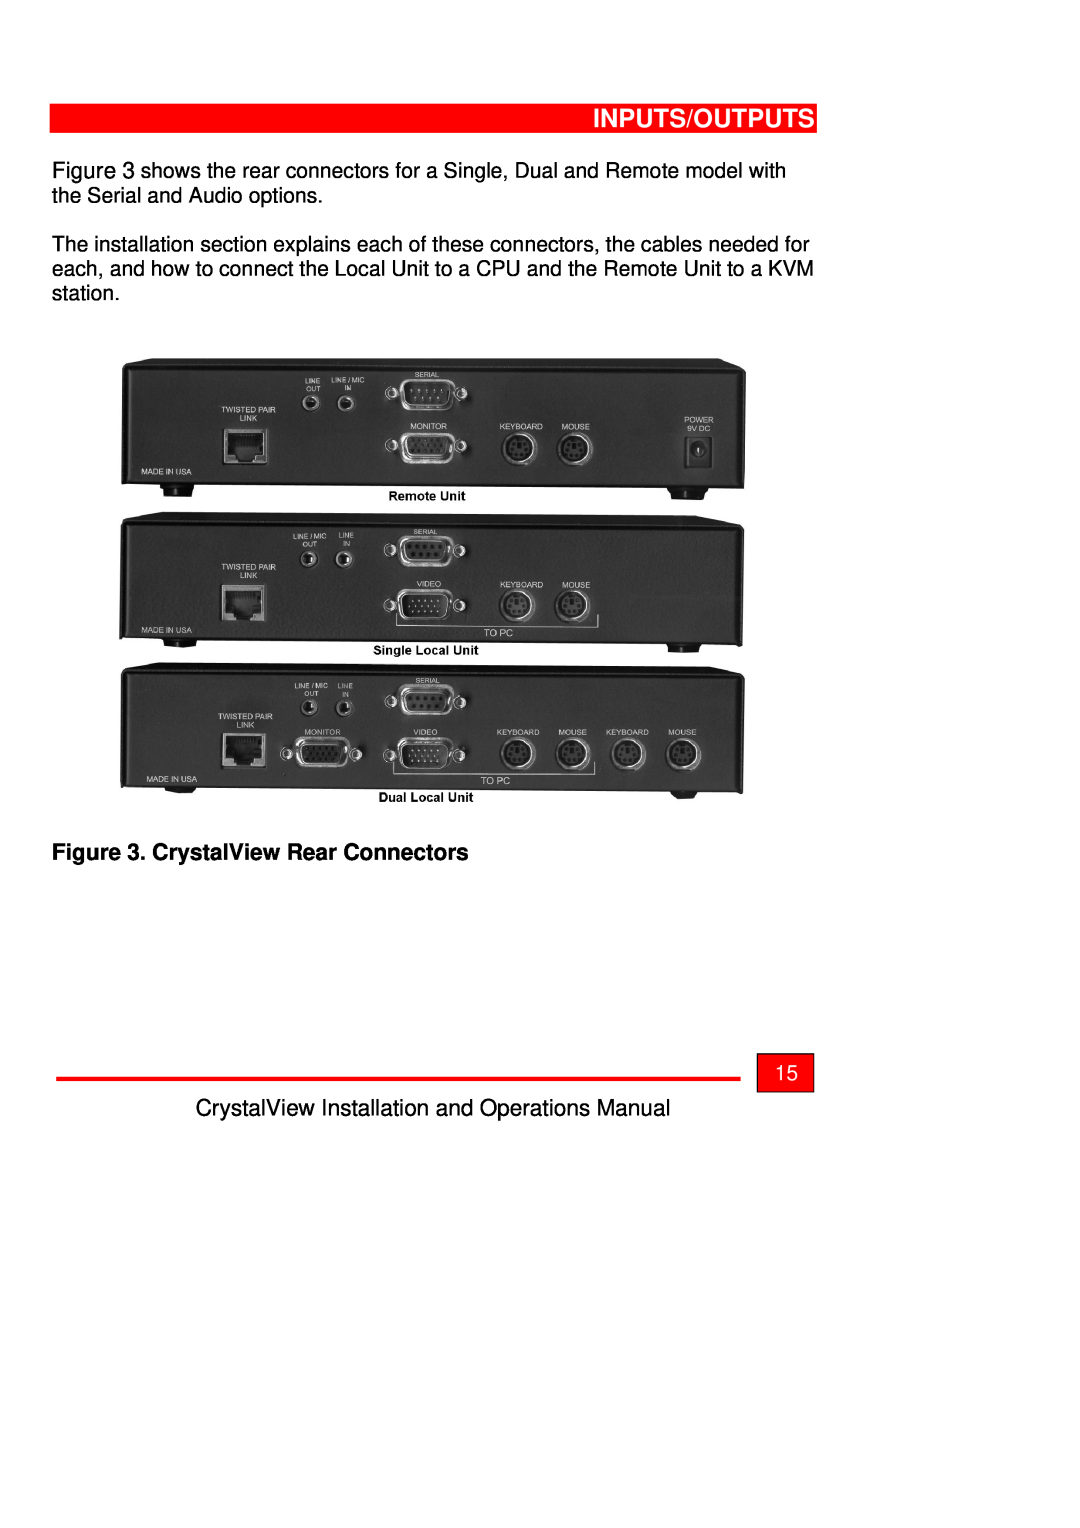 Rose electronic Crystal View operation manual Inputs/Outputs, CrystalView Rear Connectors 